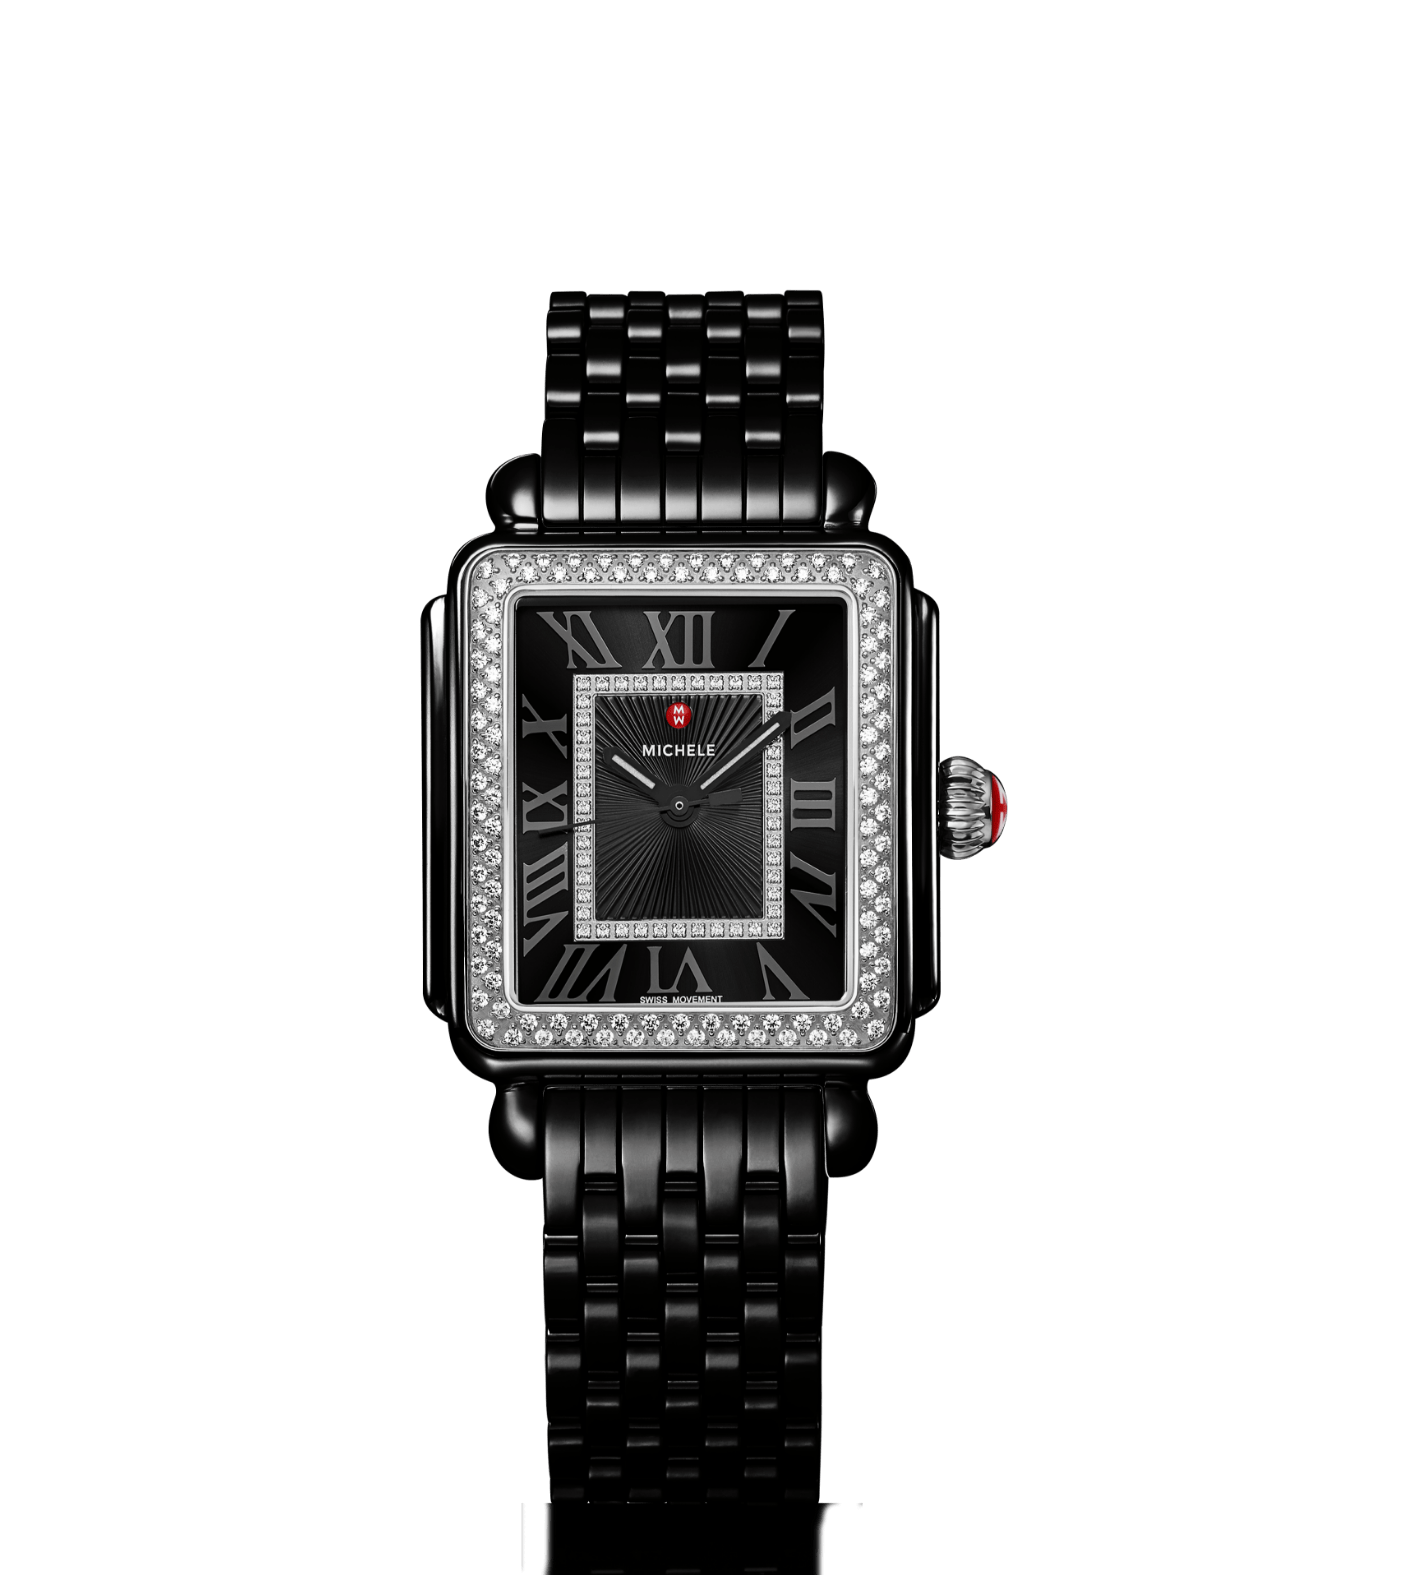 Deco Madison watch in noir with white diamonds.